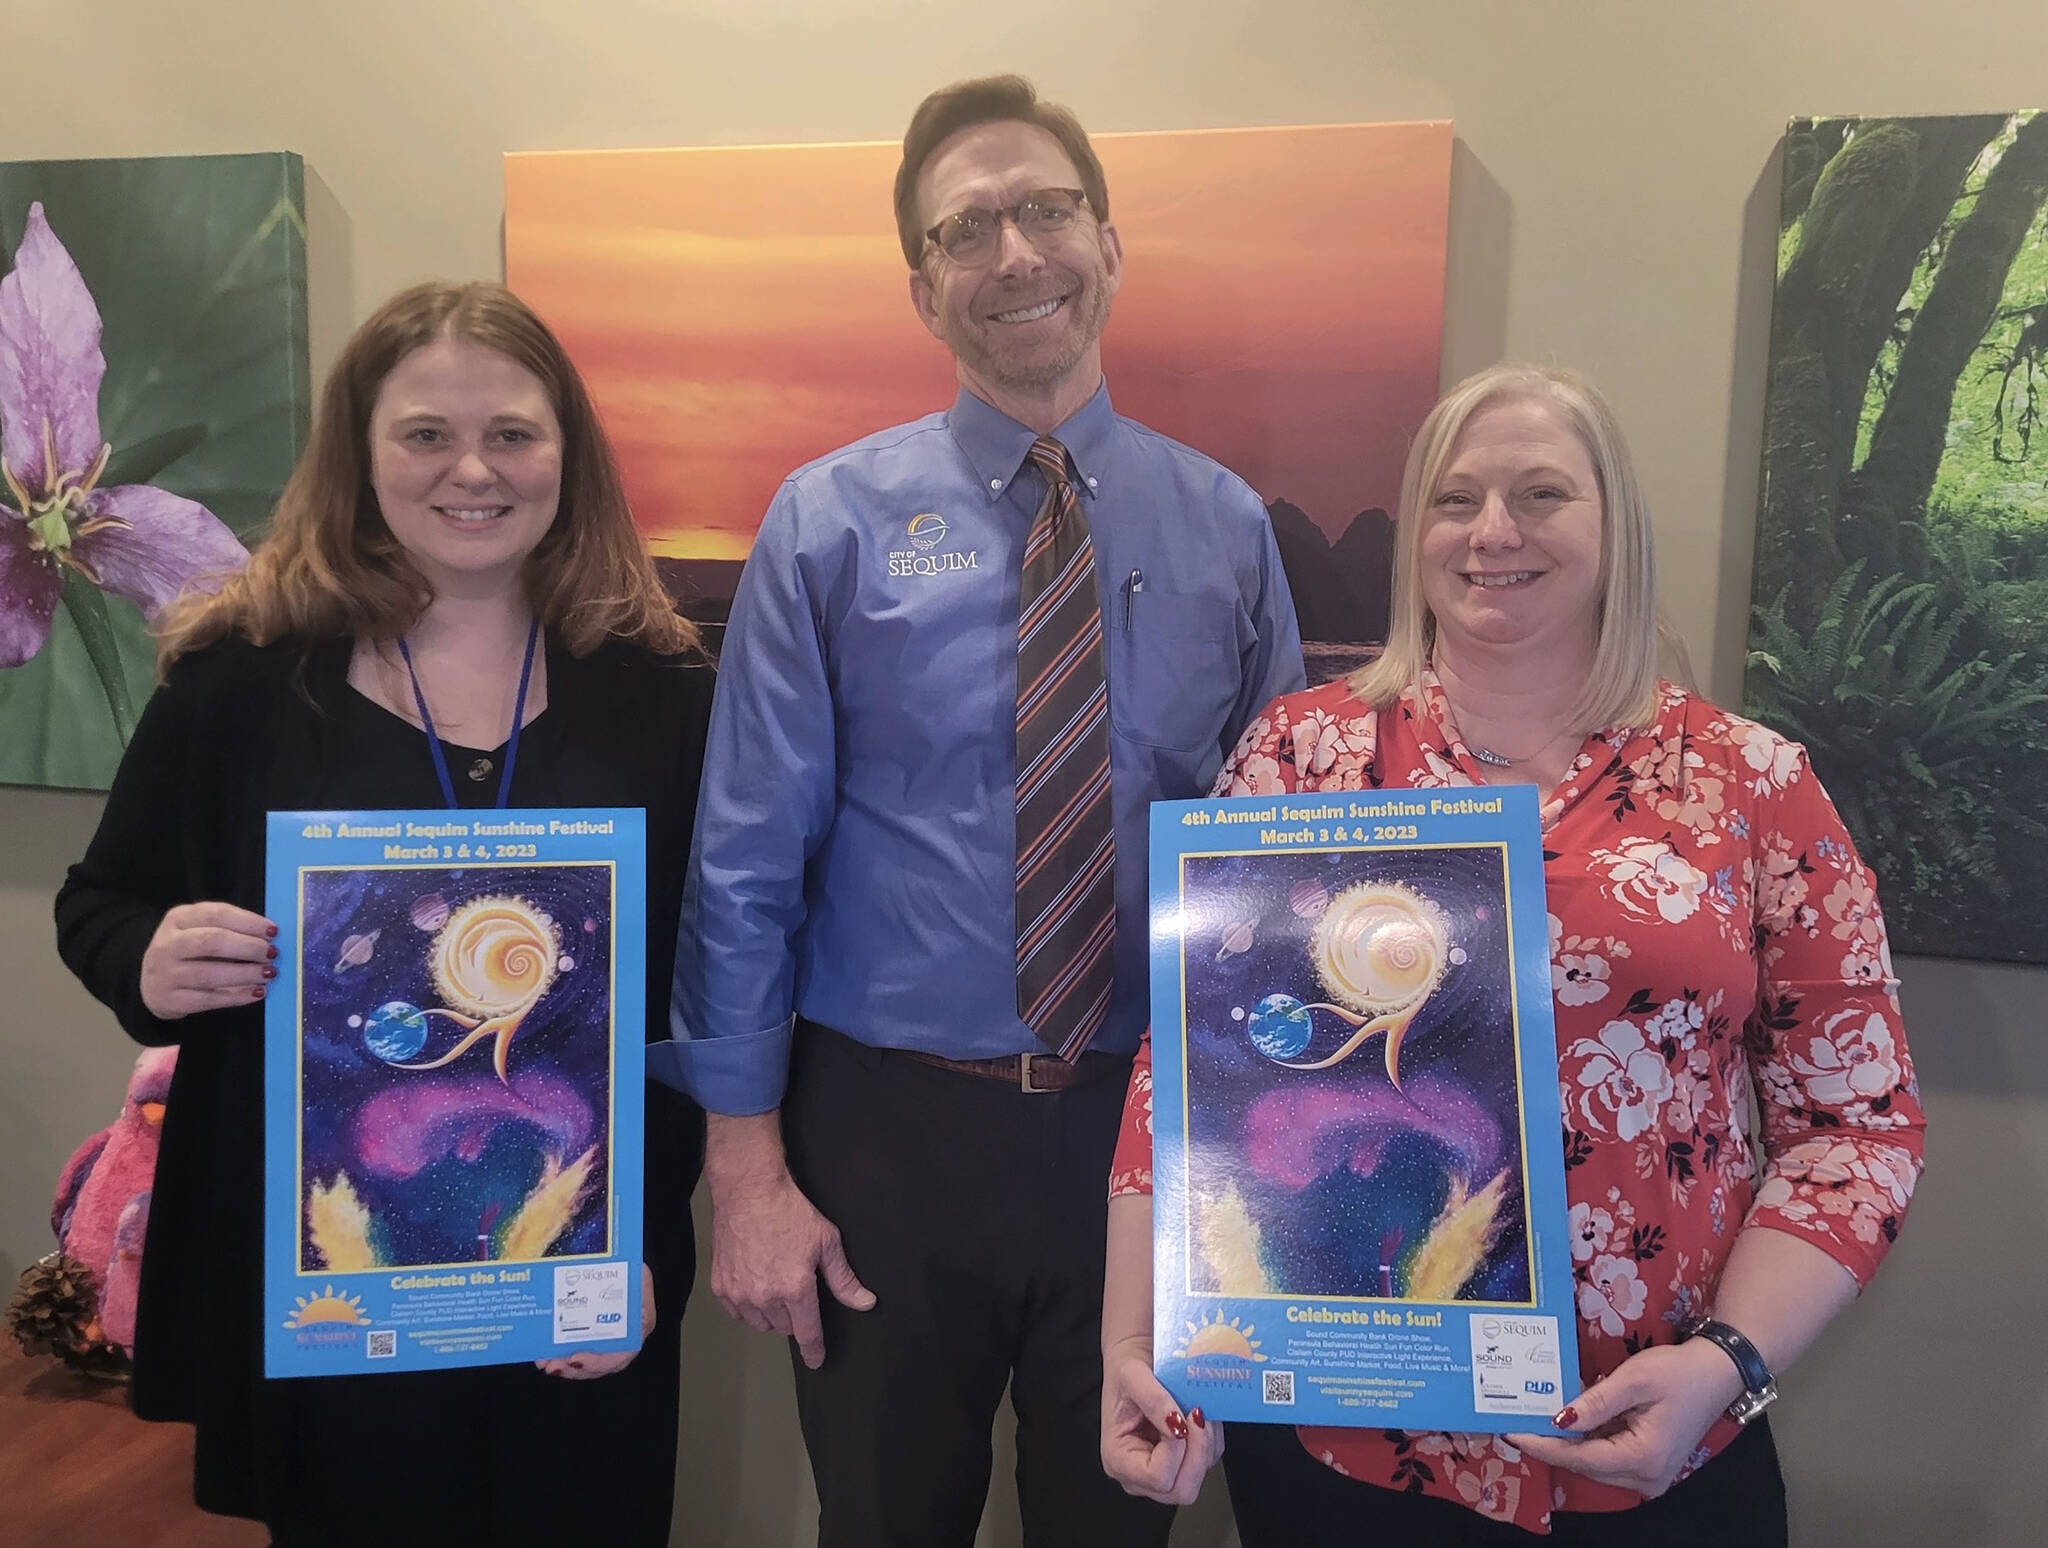 Photo courtesy of City of Sequim / Sequim City Manager Matthew Huish thanks (at left) Angeles Dennis, Development Director for Peninsula Behavioral Health, and Wendy Sisk, Peninsula Behavioral Health Chief Executive Officer, for their organization’s sponsorship of the Sequim Sunshine Festival’s Sun Fun Color Run, set for March 4.